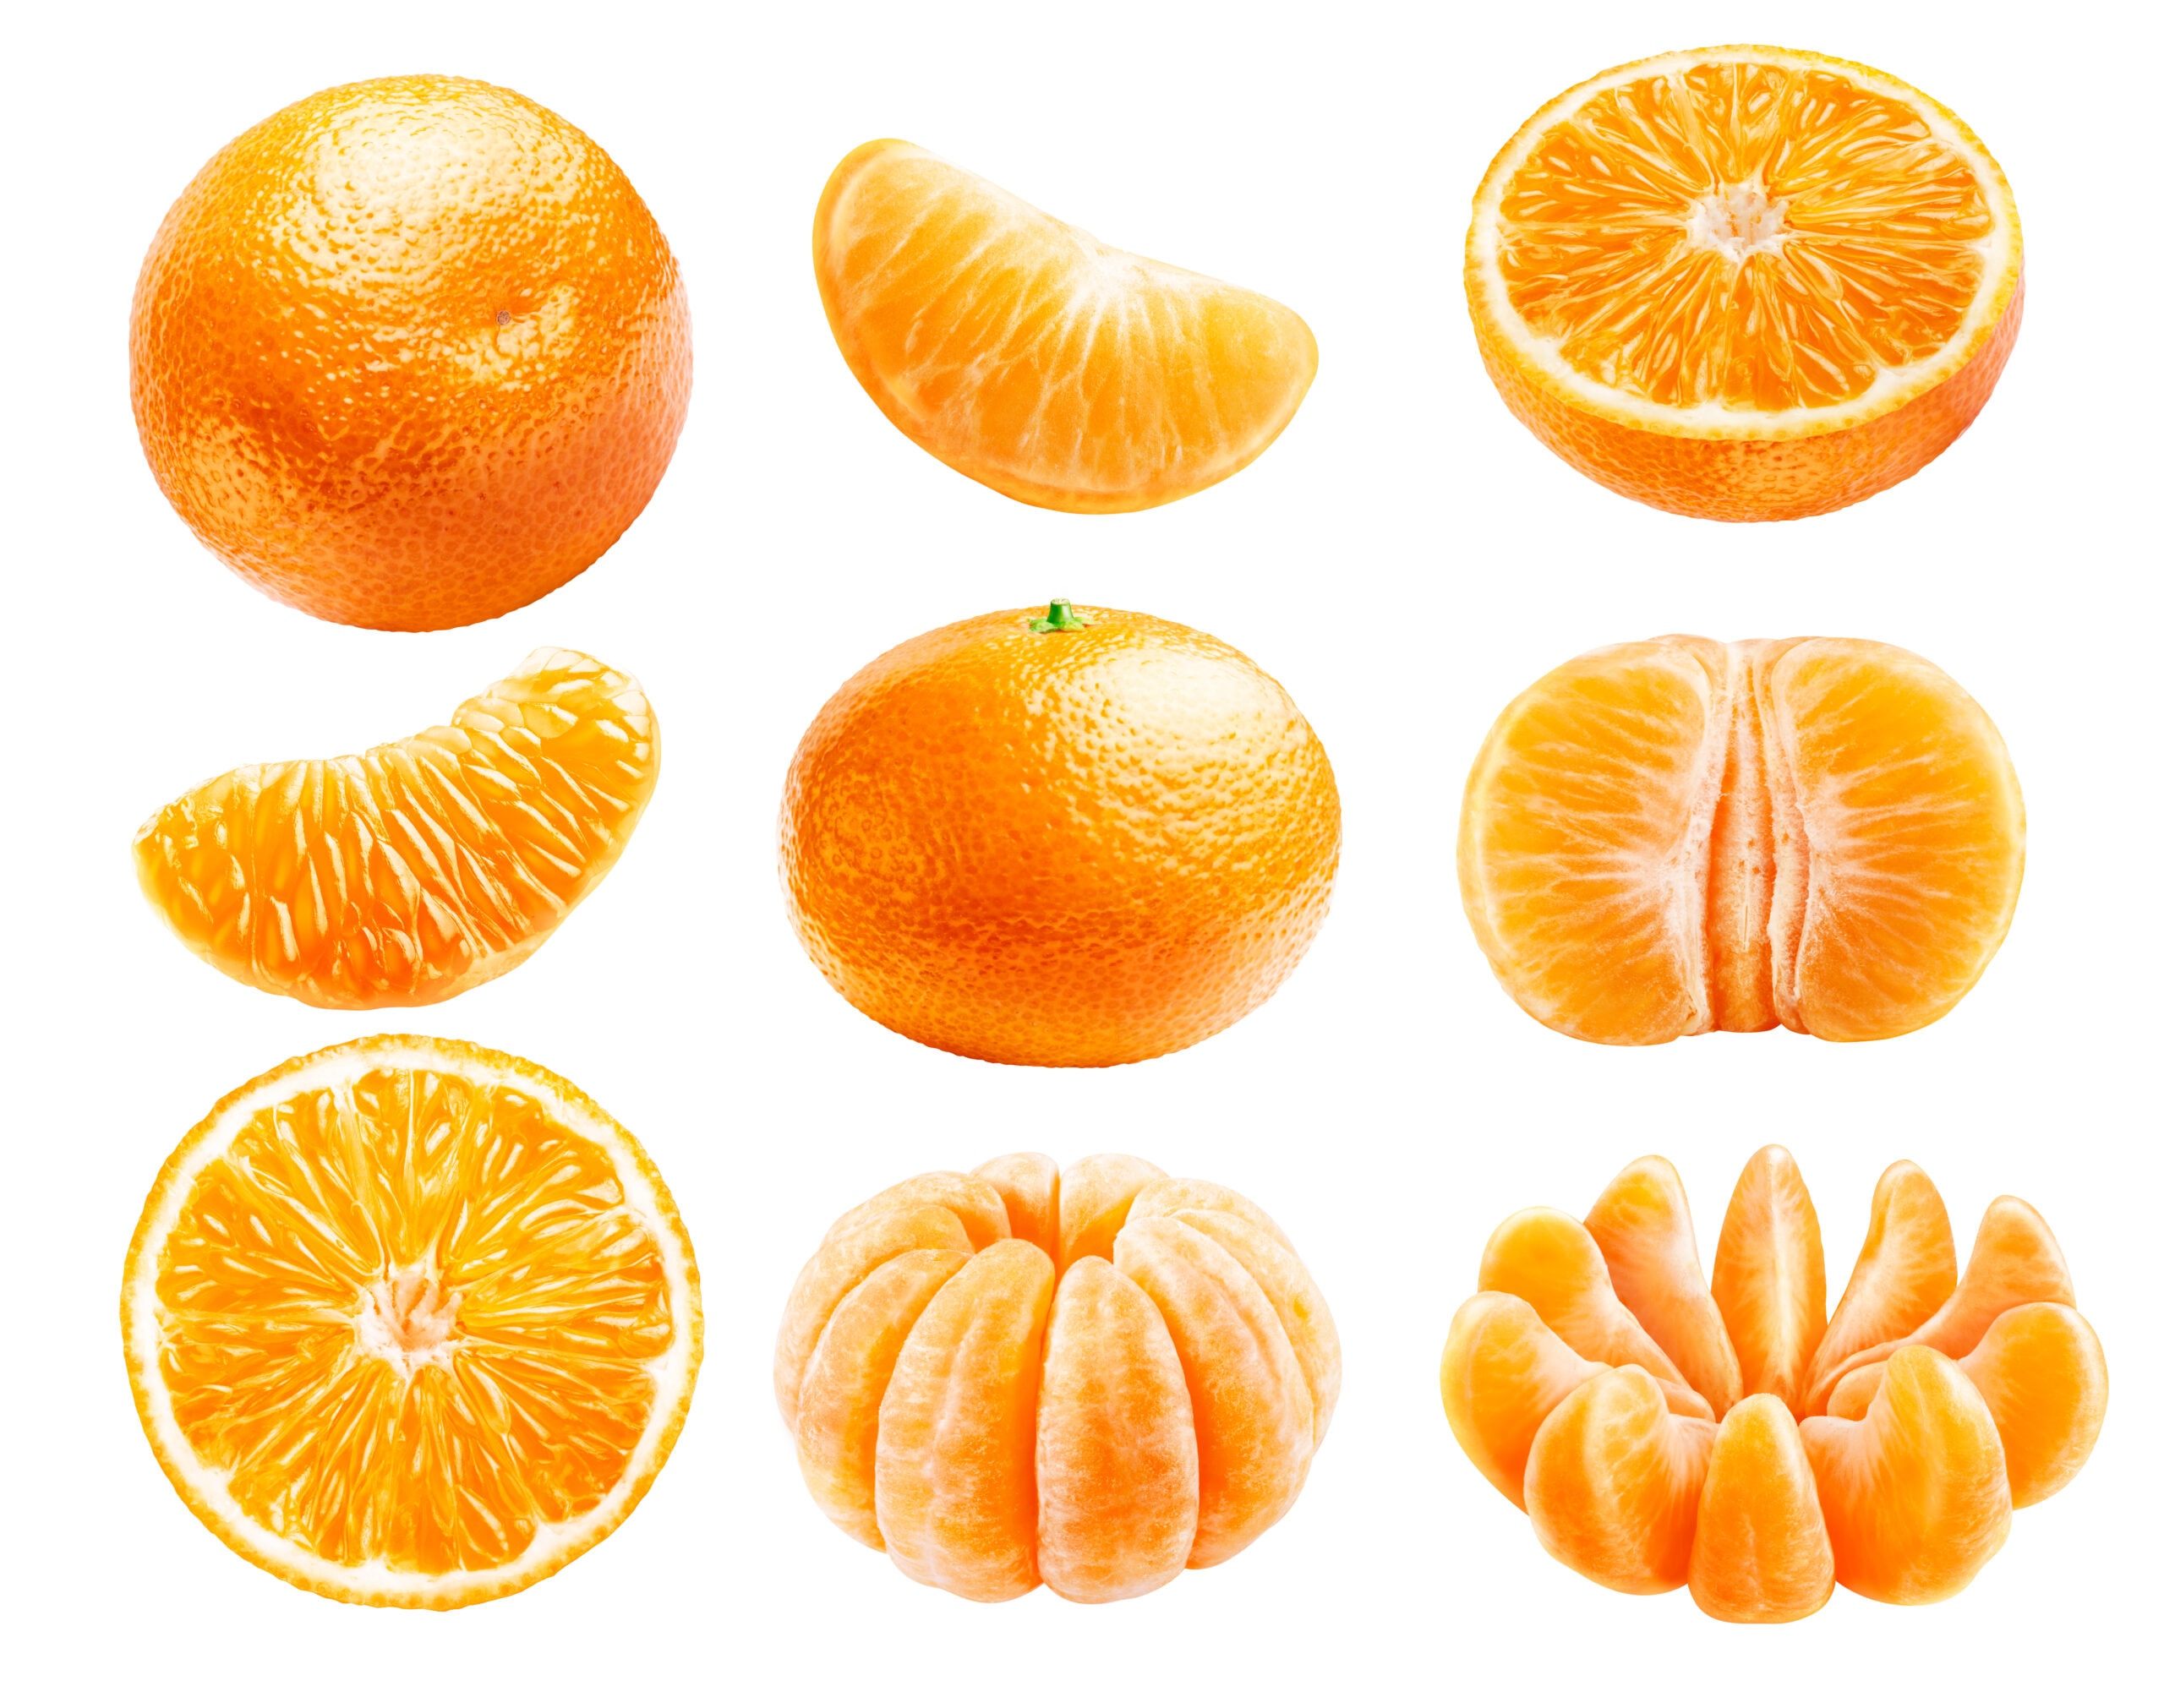 Set of whole ripe tangerines, juicy slices, peeled slices, isolated on a white background.